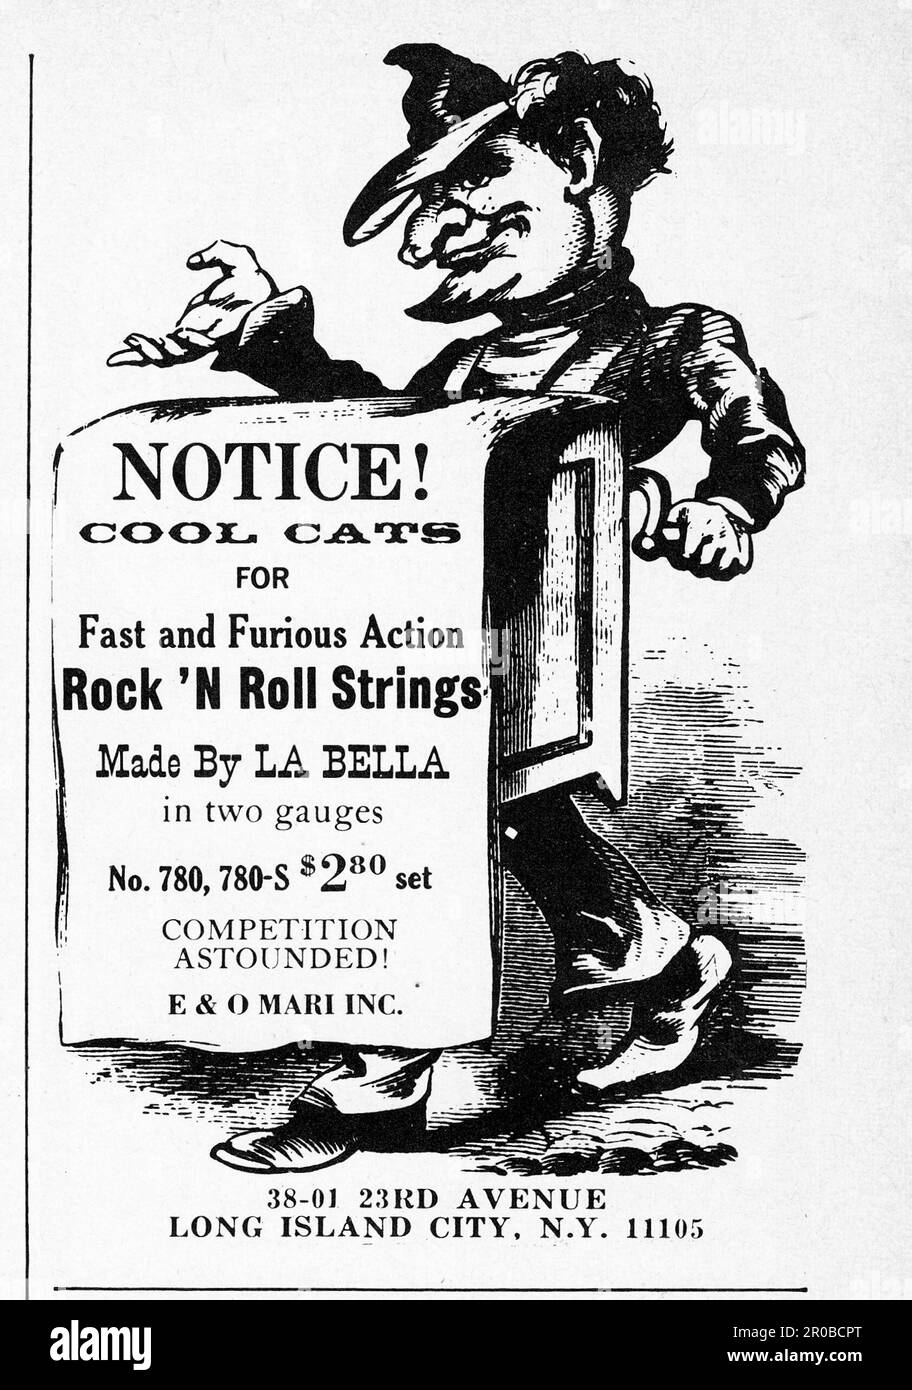 An ad for La Bella fast and furious guitar strings featuring an old fashioned illustration of a somewhat creepy guy printing notices for cool cats. From a mid 1960s magazine ad. Stock Photo